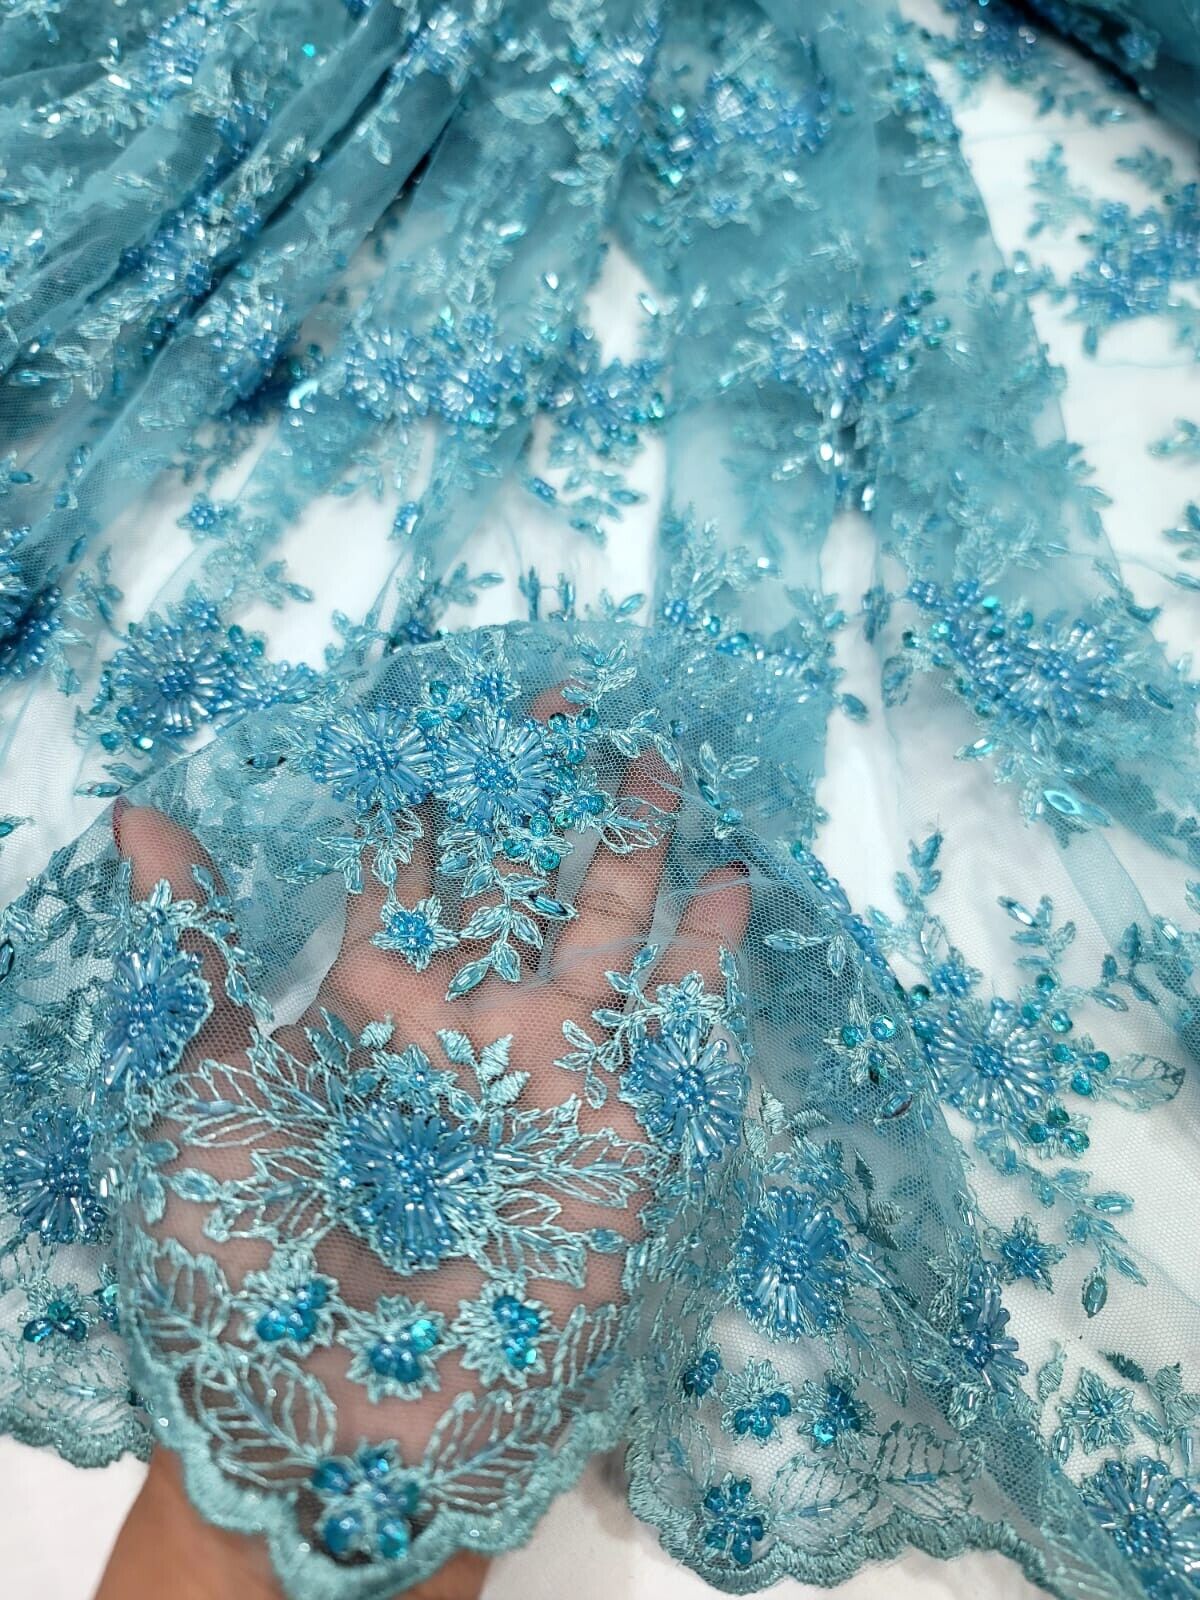 Beaded Lace Fabric By The Yard Embroidered Mesh Bridal Wedding Dress Turquoise